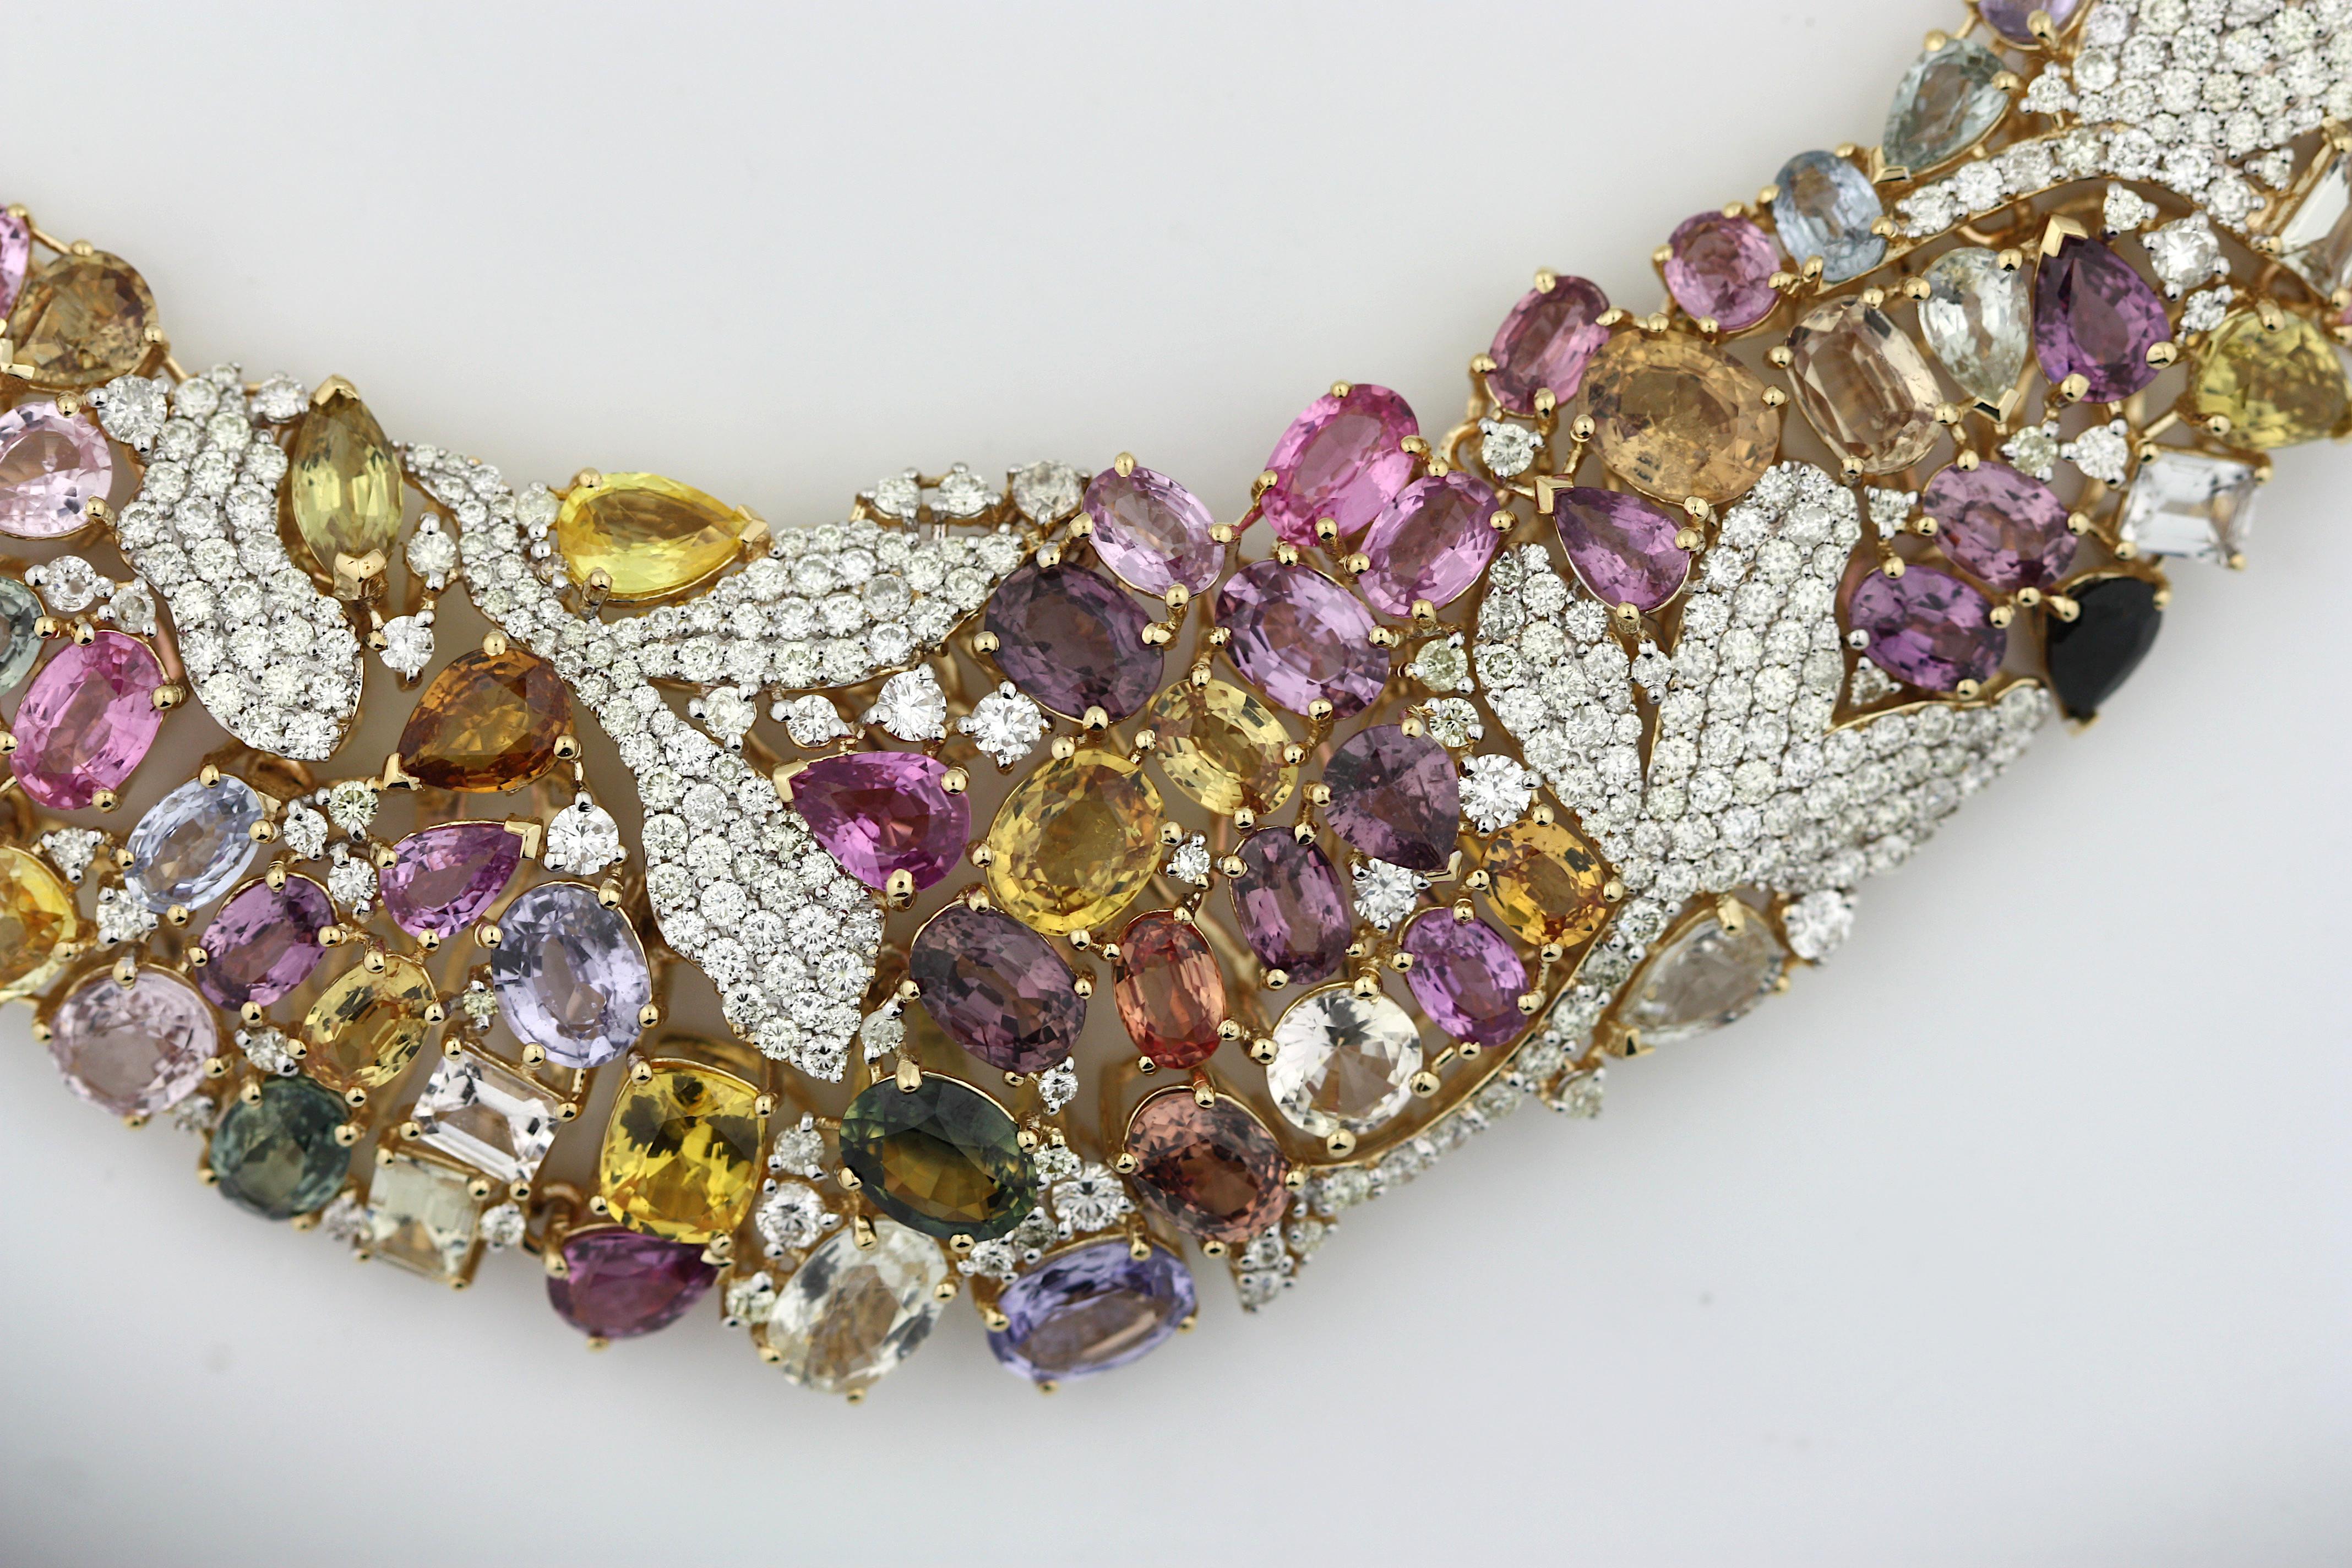 18K Yellow Gold Multi Color Sapphire and Diamond Collar Necklace 
Featuring multi-colored natural, unheated sapphires of emerald, pear, oval and marquise shapes
weighing 124.87 cts., measuring 8.0 x 2.0 mm 
with round brilliant-cut diamonds